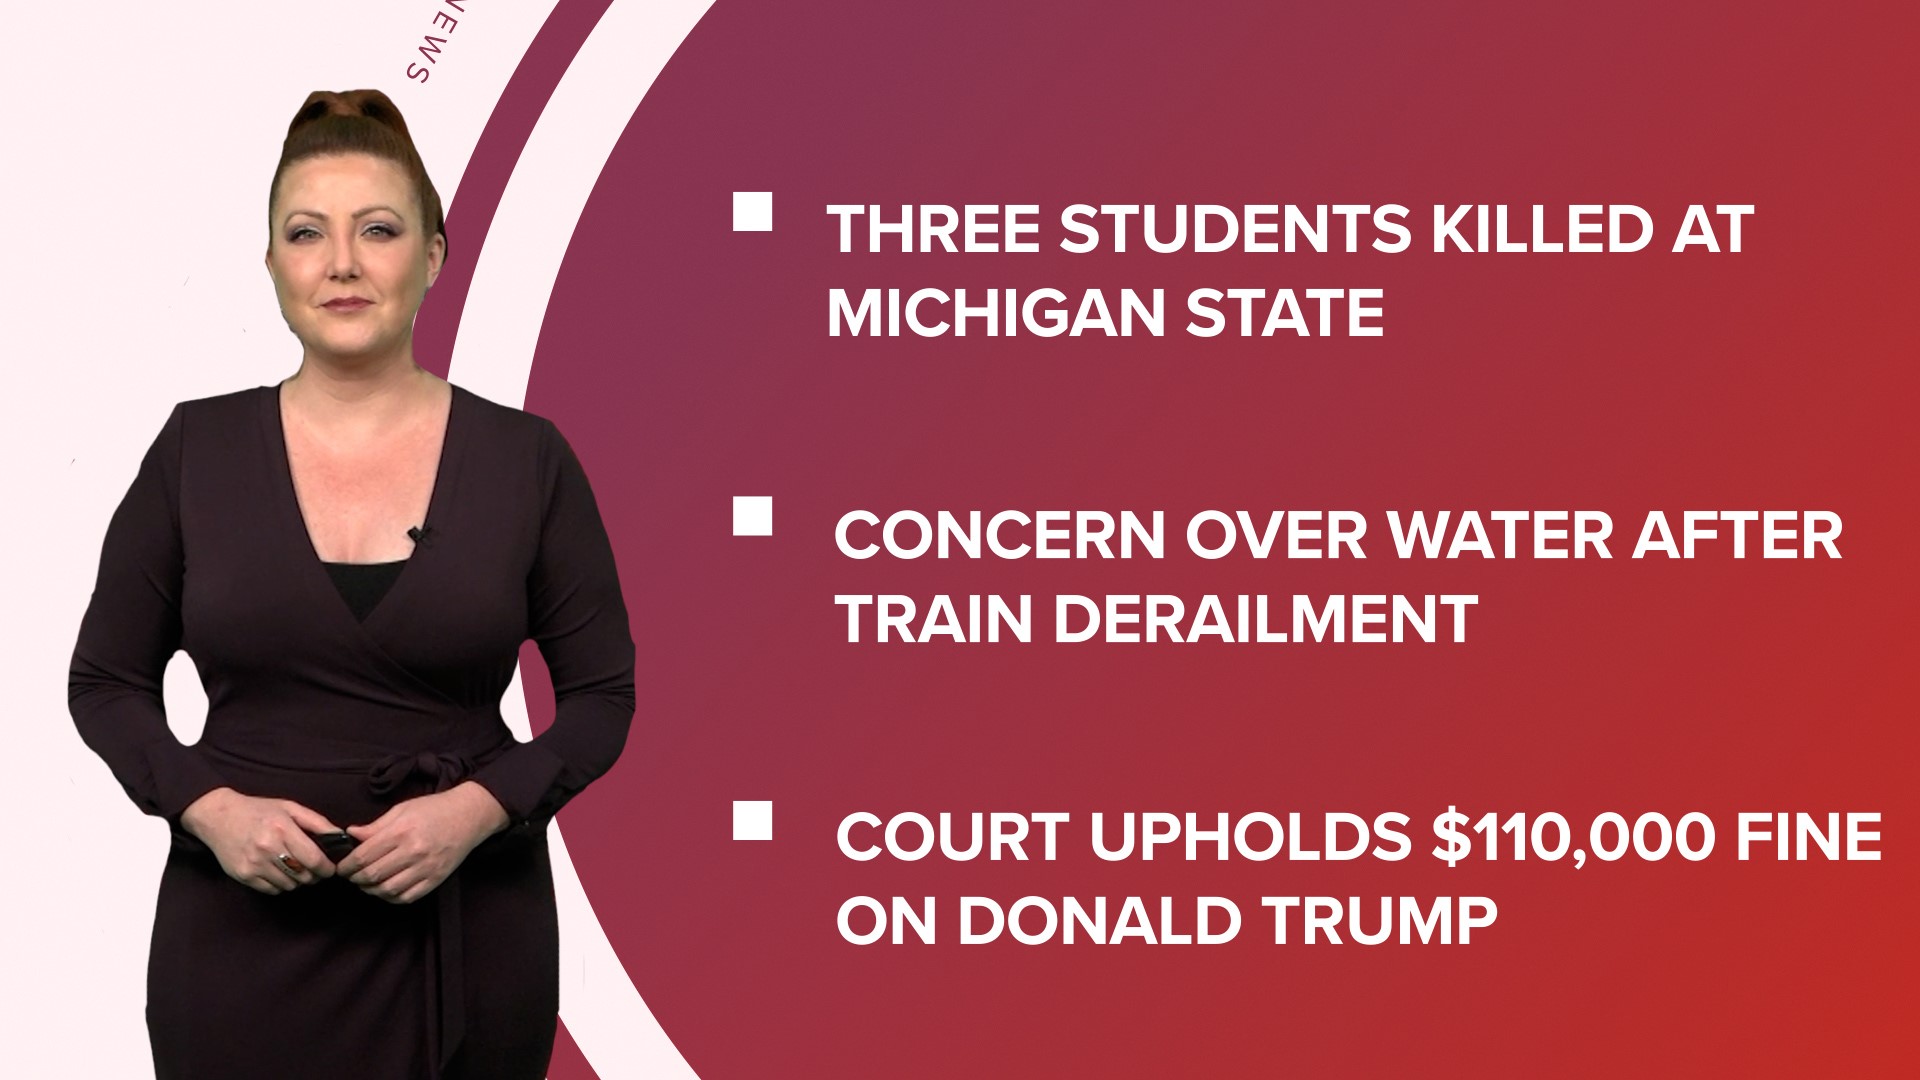 A look at what is happening in the news from students reacting to the mass shooting at Michigan State University to an update on a chemical spill in Ohio.